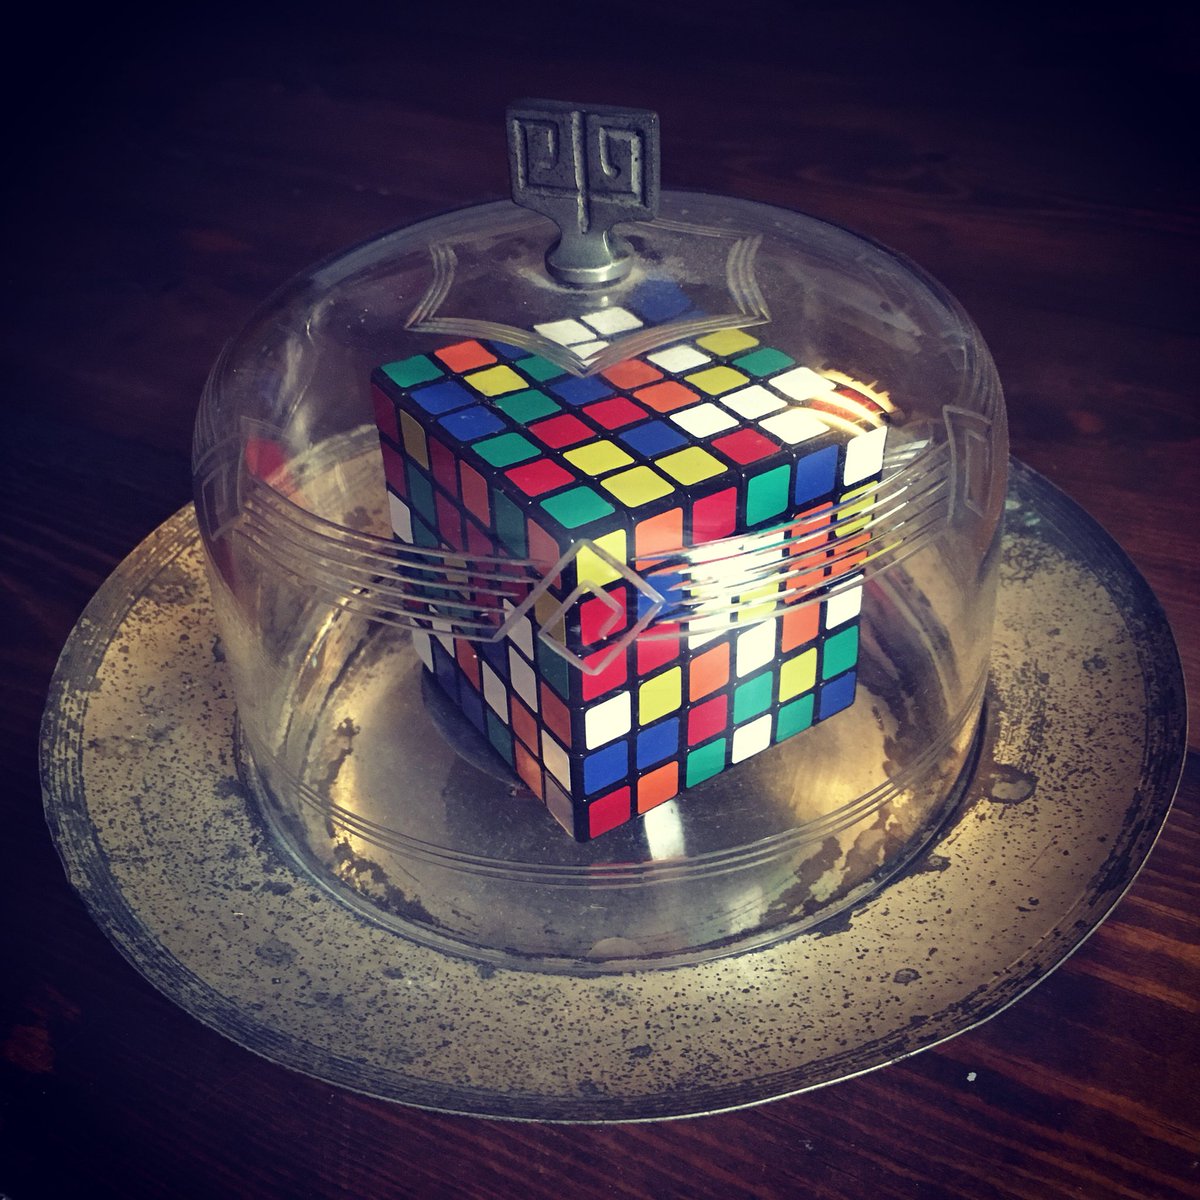 Under the Dome
#cube #rubikscubes